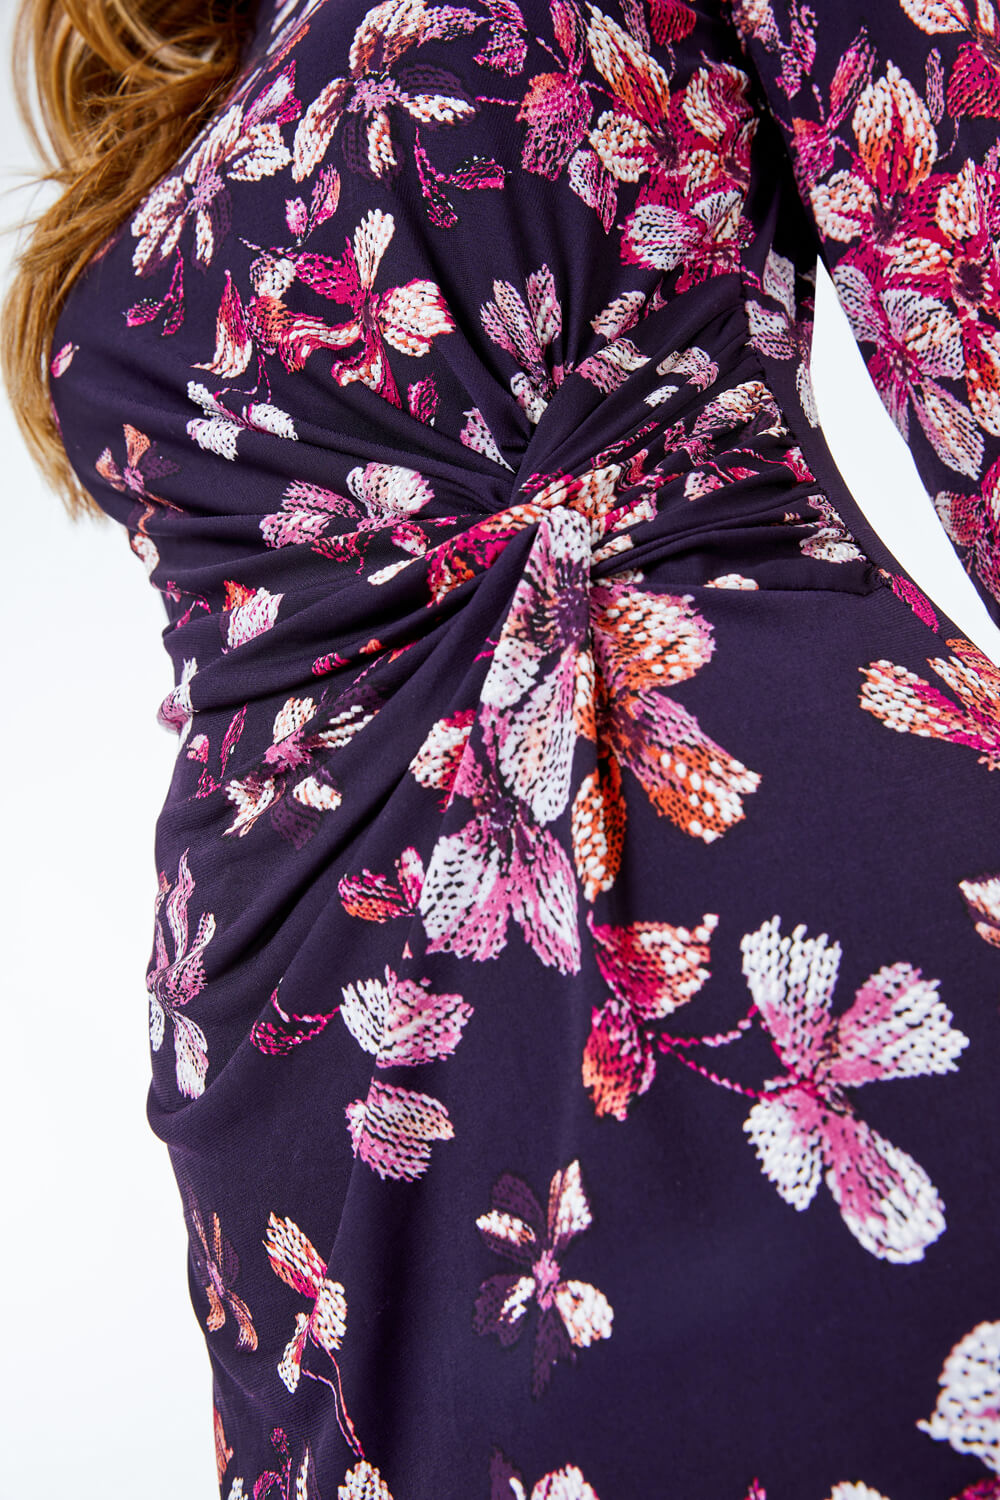 Aubergine Textured Floral Ruched Waist Dress, Image 5 of 5